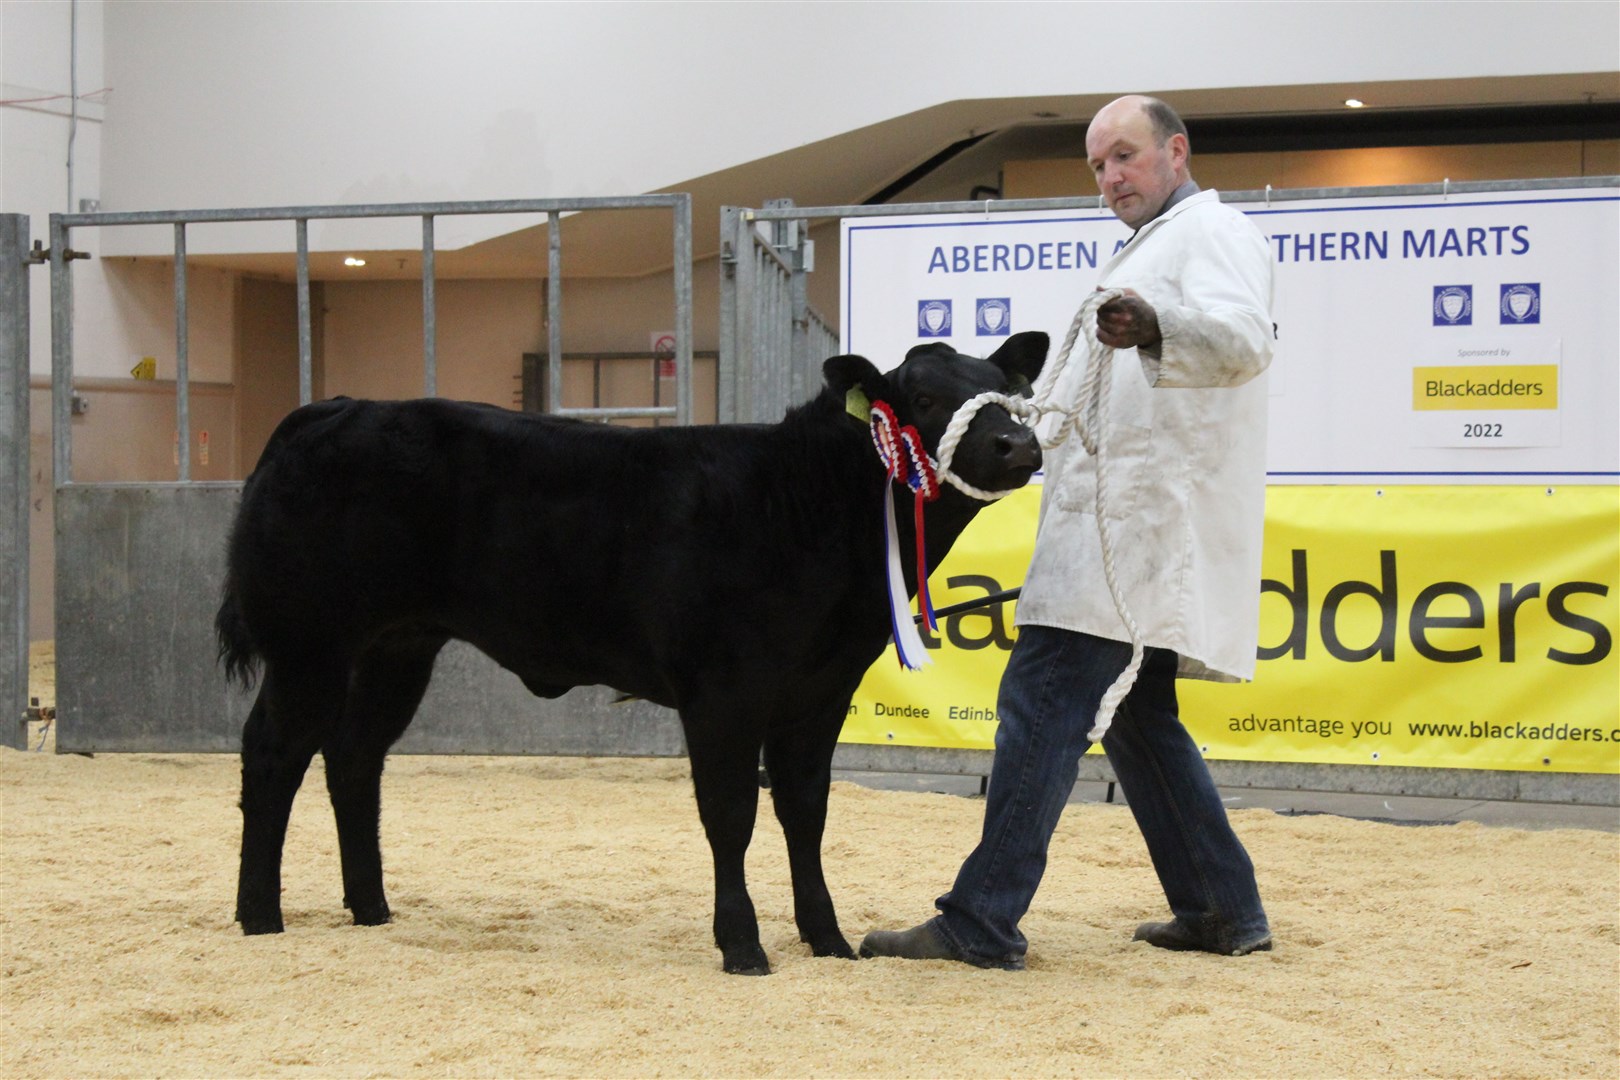 2022 champion Balfour Baillie with his overall champion Limousin cross heifer calf.